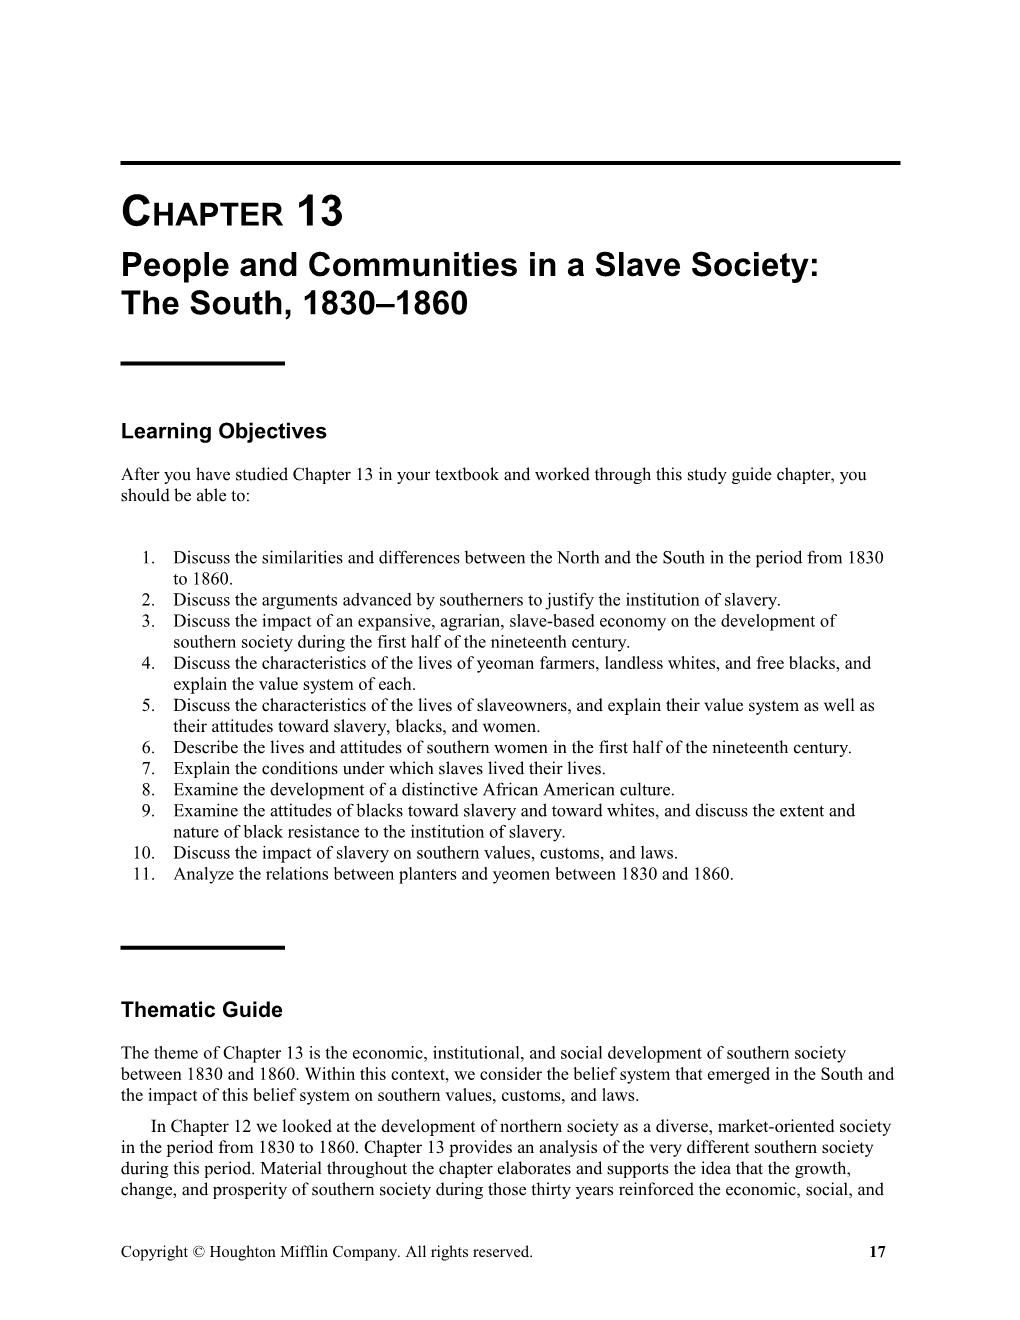 People and Communities in a Slave Society: the South, 1830 18601